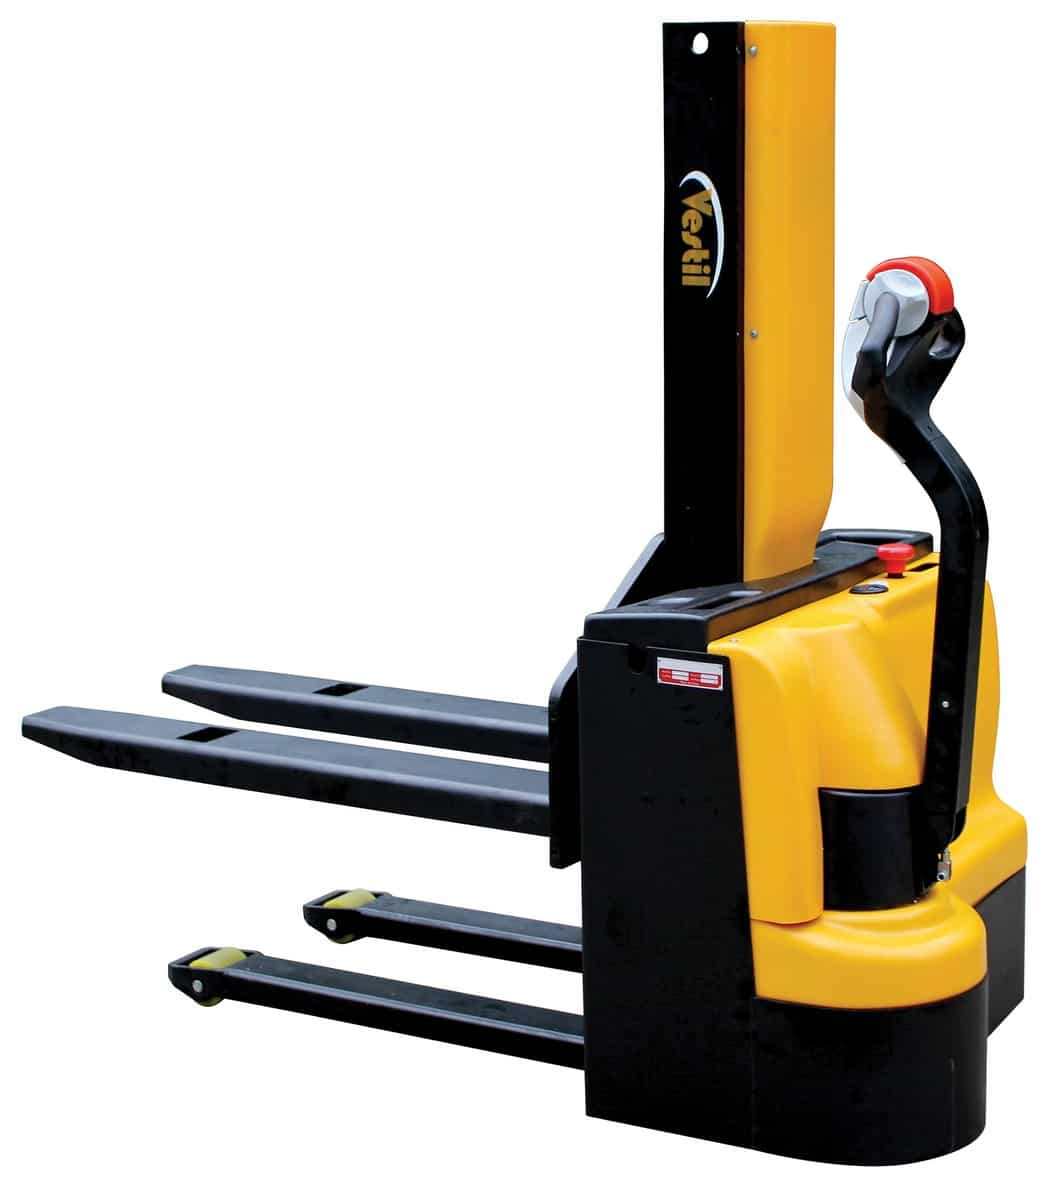 - Snm3-43-Aa Stacker Pwr Lift/Dr Adj Frk 43In 3000 Lb - Material Handling